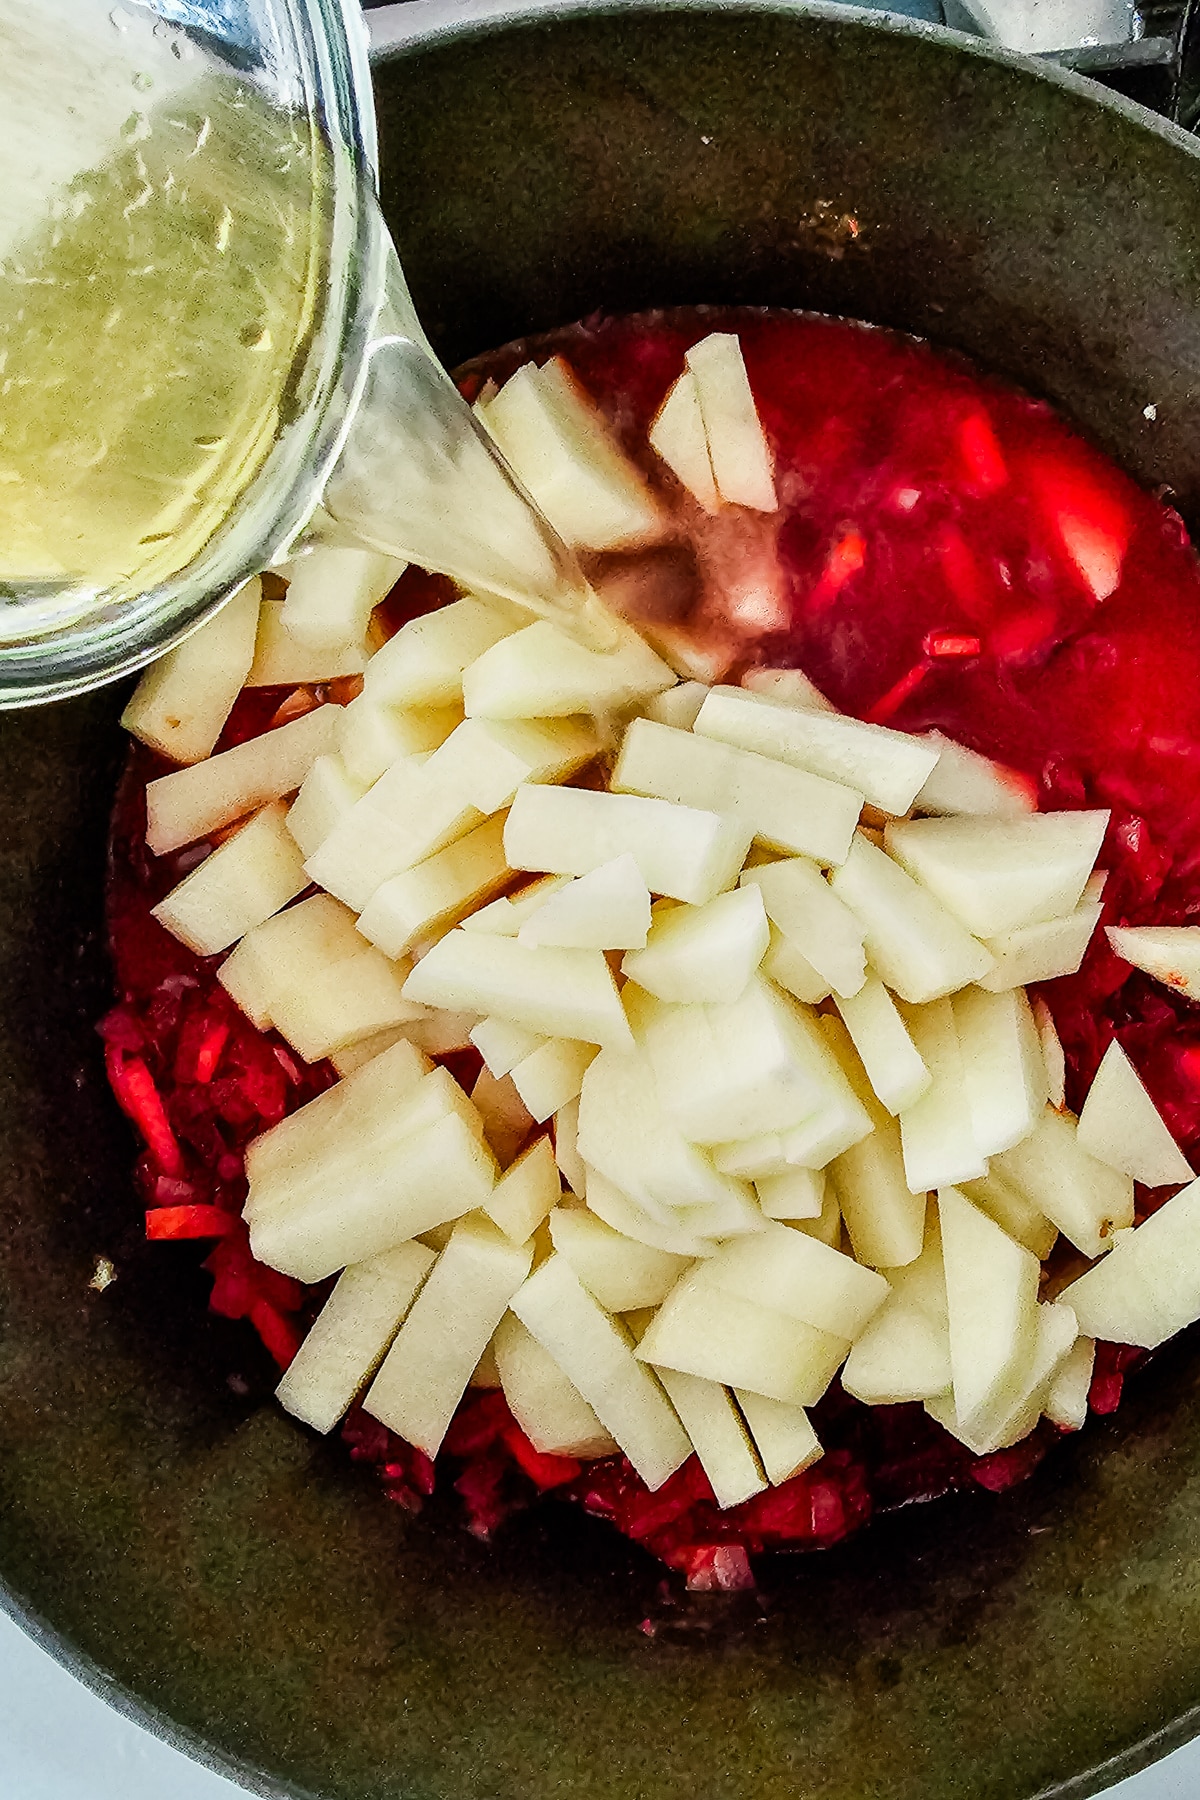 diced potatoes and broth being poured into a pot of beet soup.